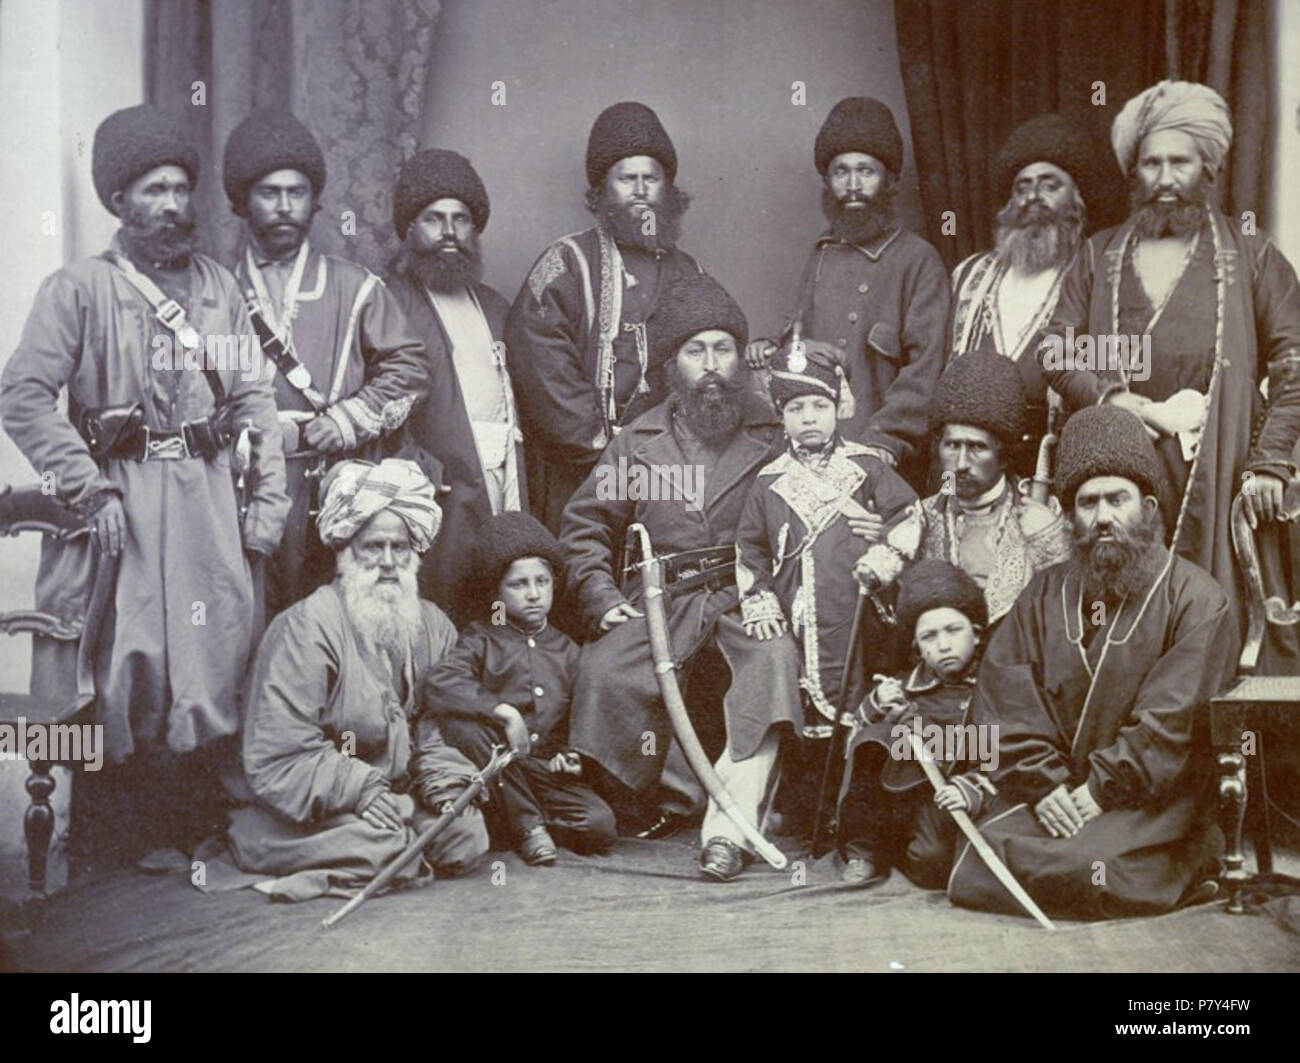 Group of the Amir Shere Ali with Prince Abdullah, Nasher Khan & Pashtun Sardars. Photograph taken by John Burke in 1869; a studio portrait of the Amir of Afghanistan, Sher Ali (1825-1879), Prince Abdullah Jan and Afghan sirdars or khans, namely Nasher Khan, from a series titled 'Photographs of the Amir Shere Ali Khan and Suite'. John Burke accompanied the Peshawar Valley Field Force, one of three British Anglo-Indian army columns deployed in the Second Afghan War (1878-80), despite being rejected for the role of official photographer. He financed his trip by advance sales of his photographs 'i Stock Photo